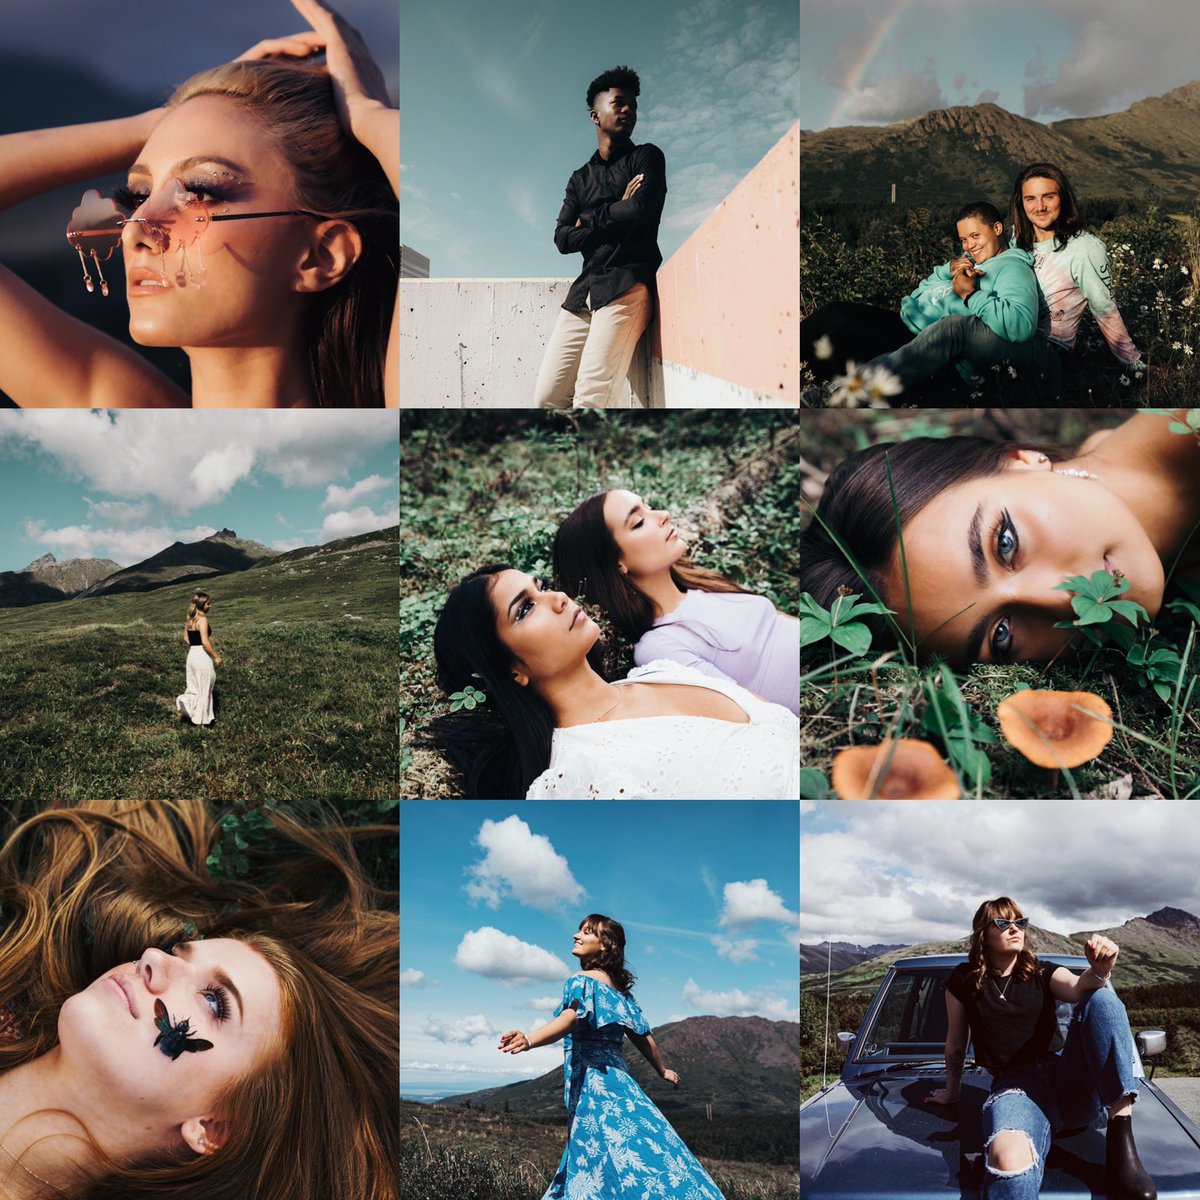 im a portrait & landscape photographer from alaska! heres some of my portraits (: i post my work pretty frequently if you wanna follow me!